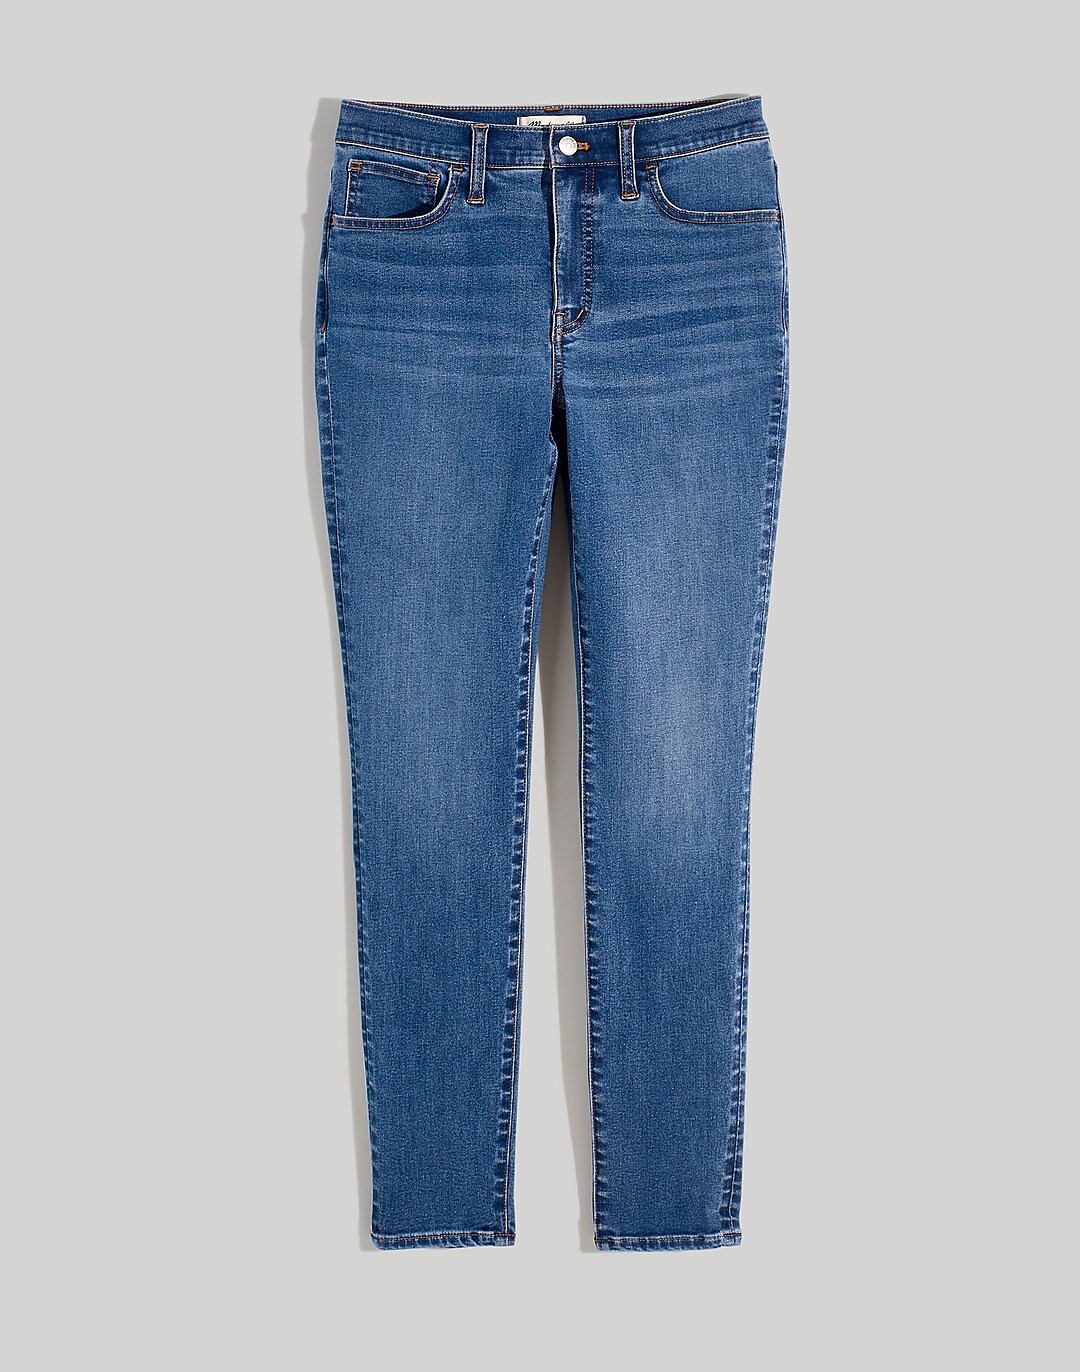 Petite 9 Mid-Rise Roadtripper Supersoft Skinny Jeans in Hastings Wash